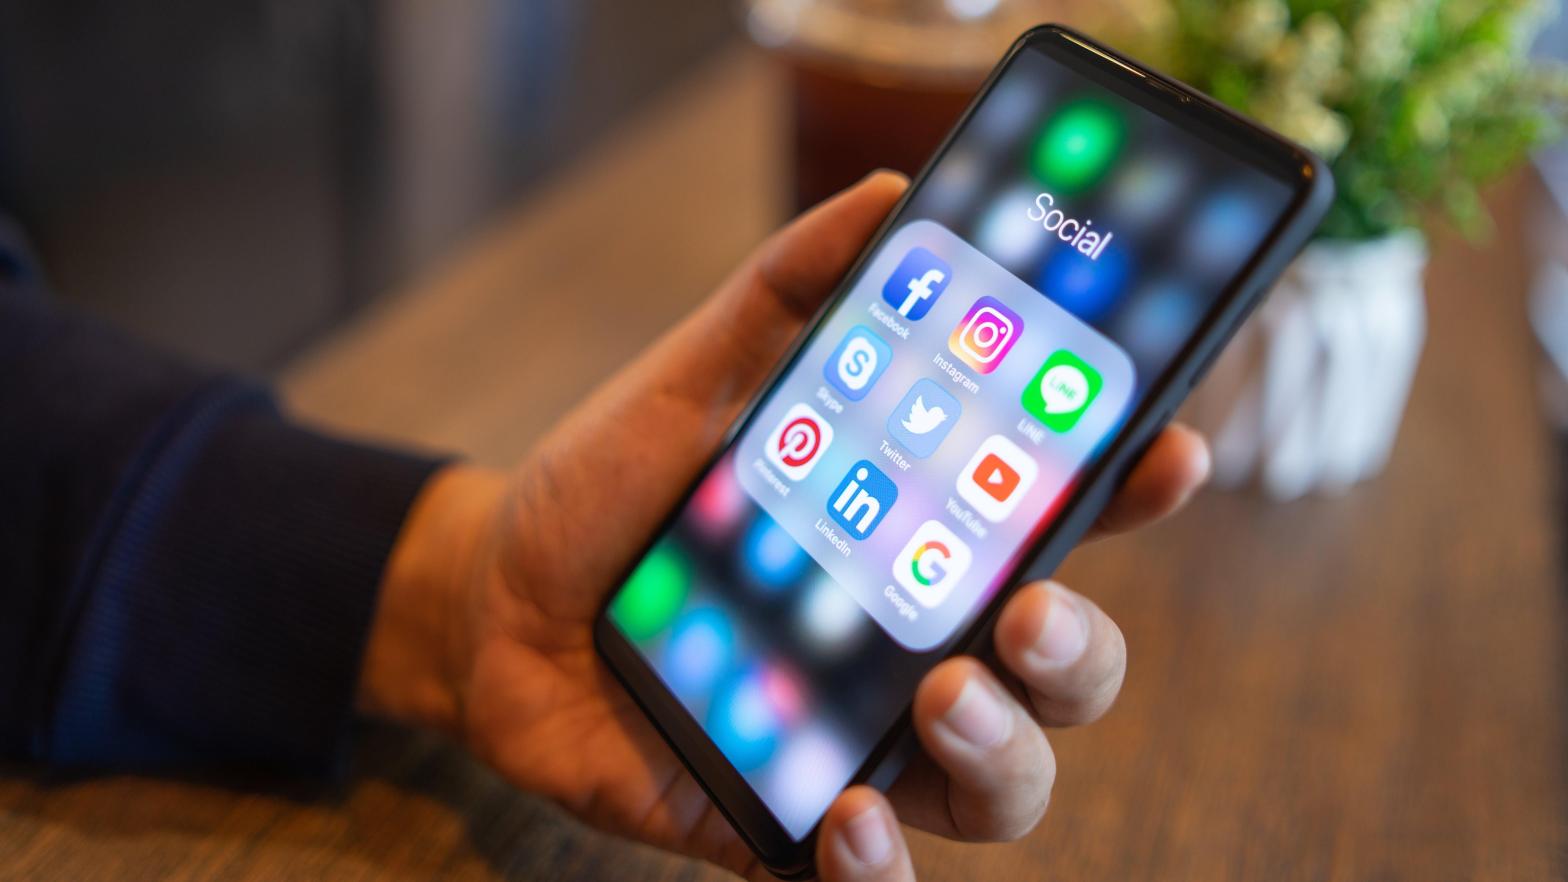 Texas Representative Jared Patterson's new bill makes no express mention of what social media platforms are being held to the suggested verification requirements.  (Image: Nopparat Khokthong, Shutterstock)